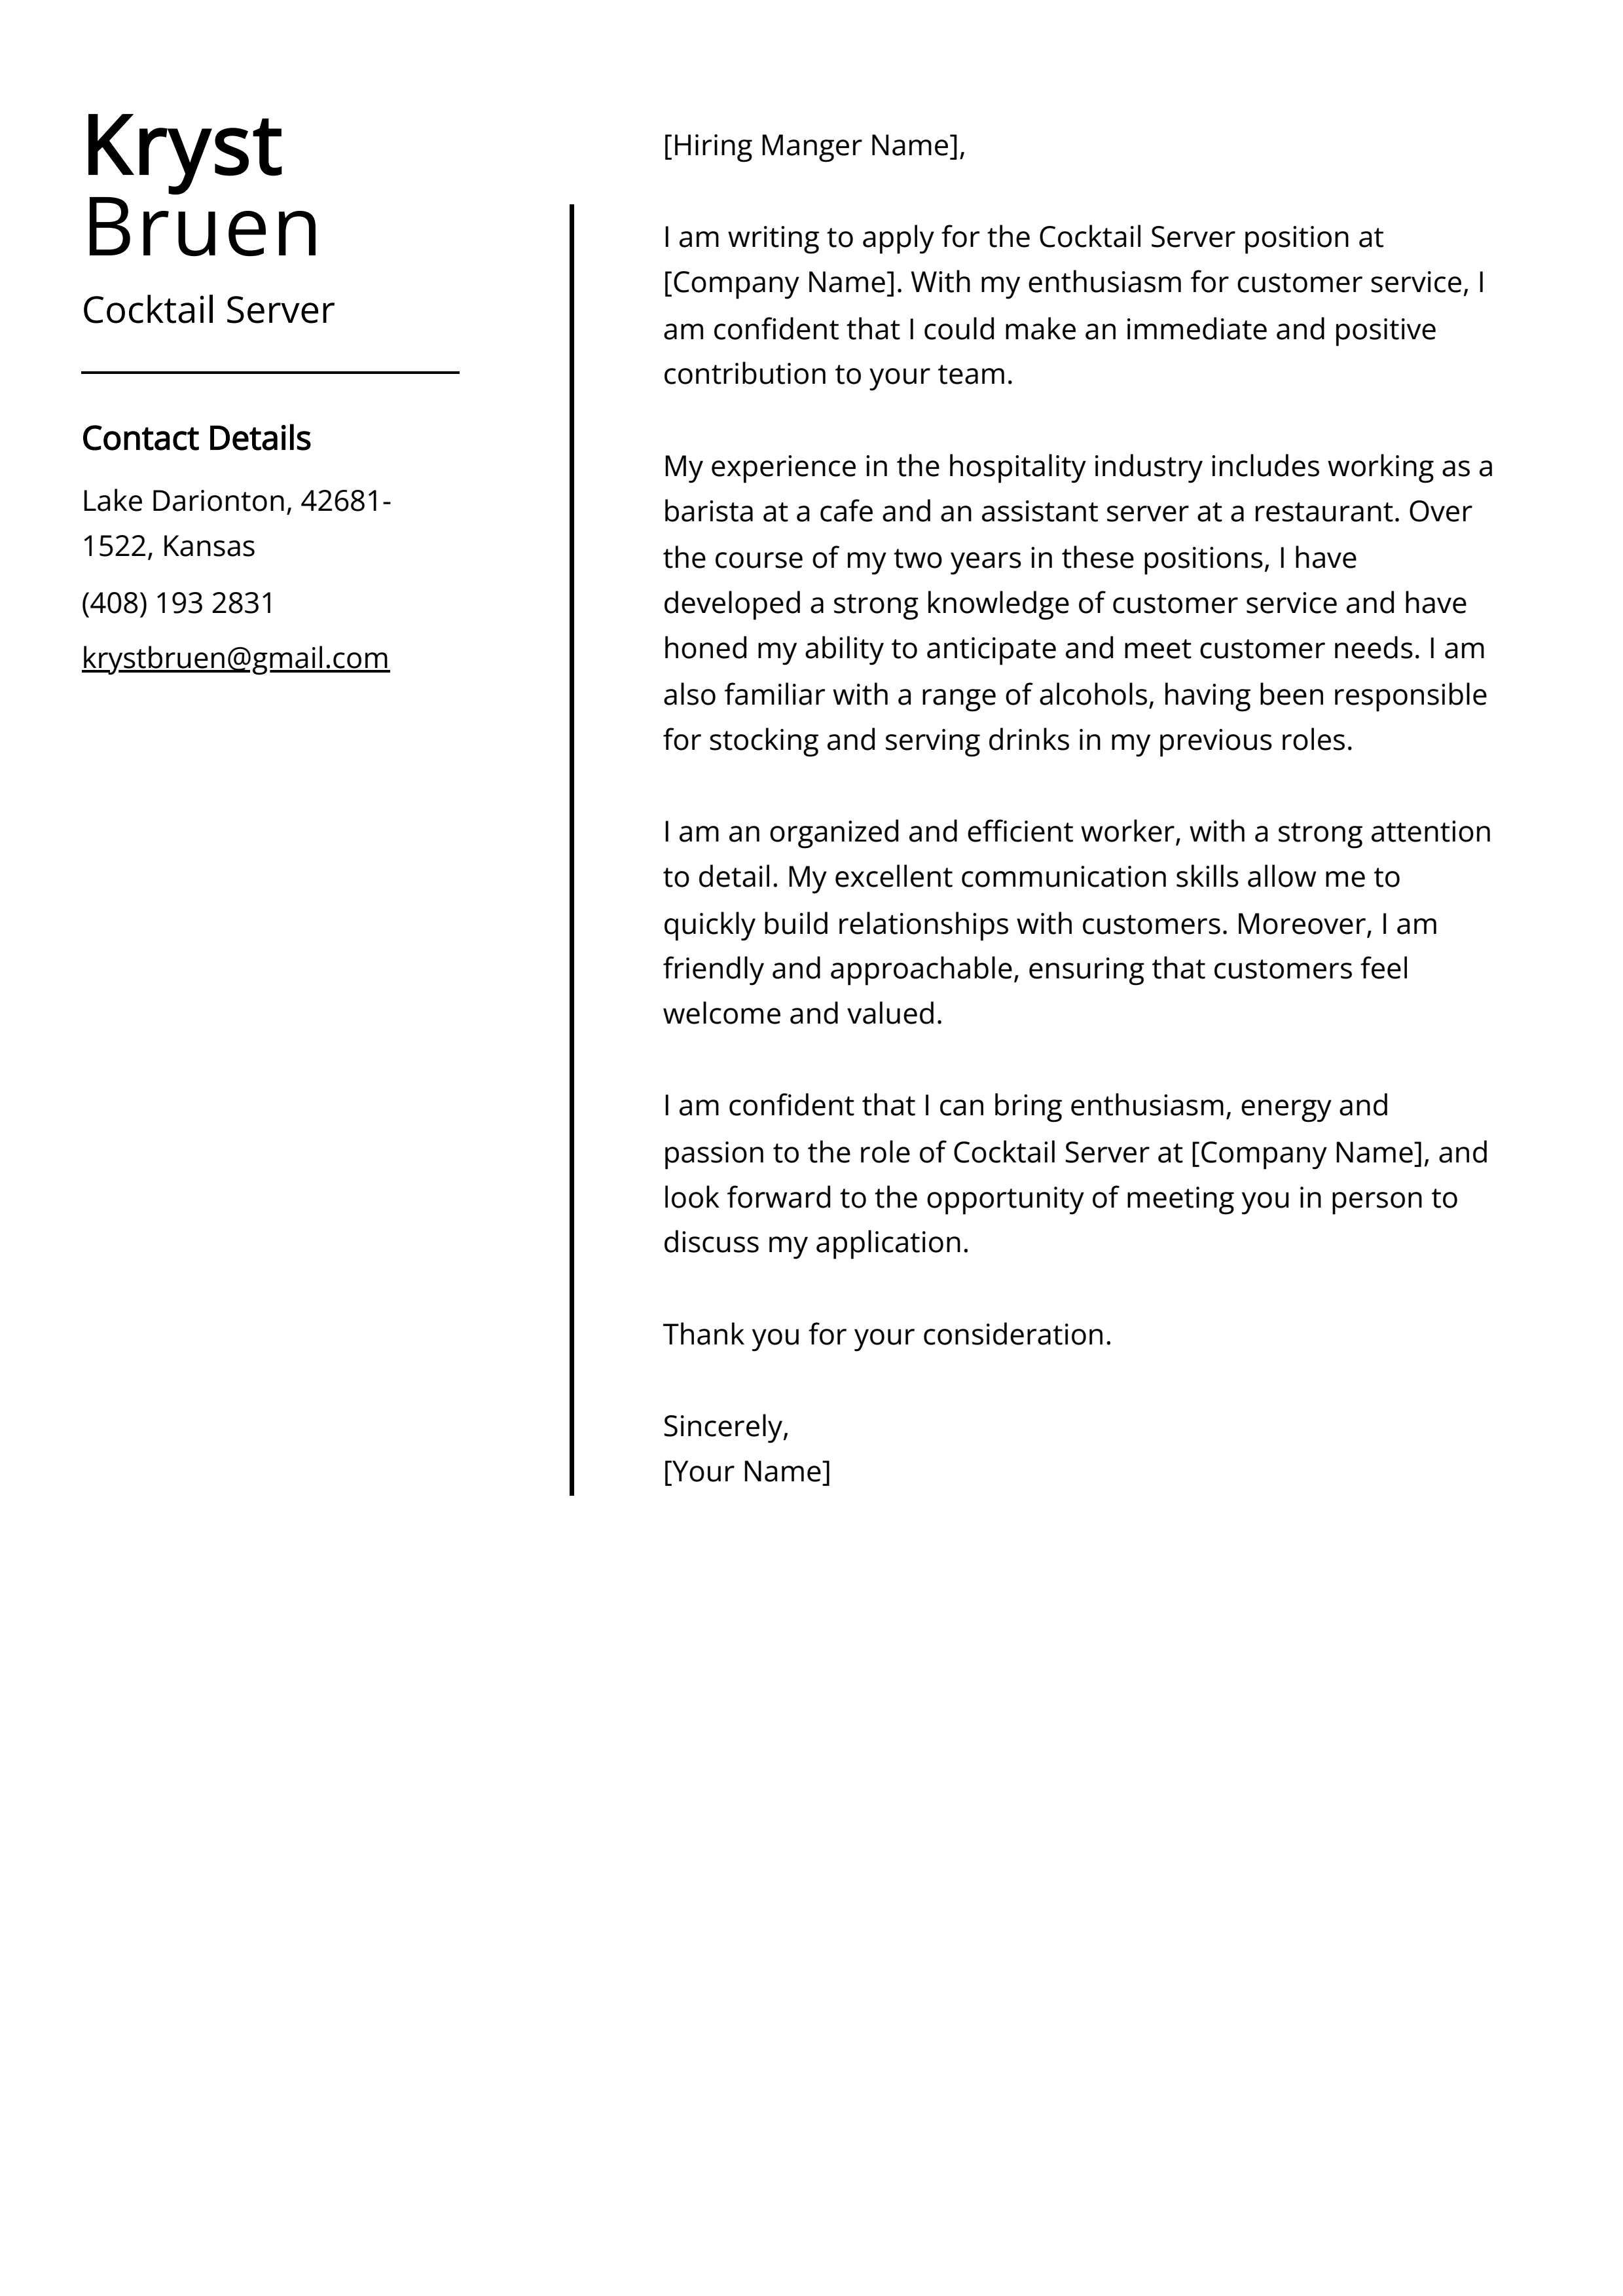 Cocktail Server Cover Letter Example